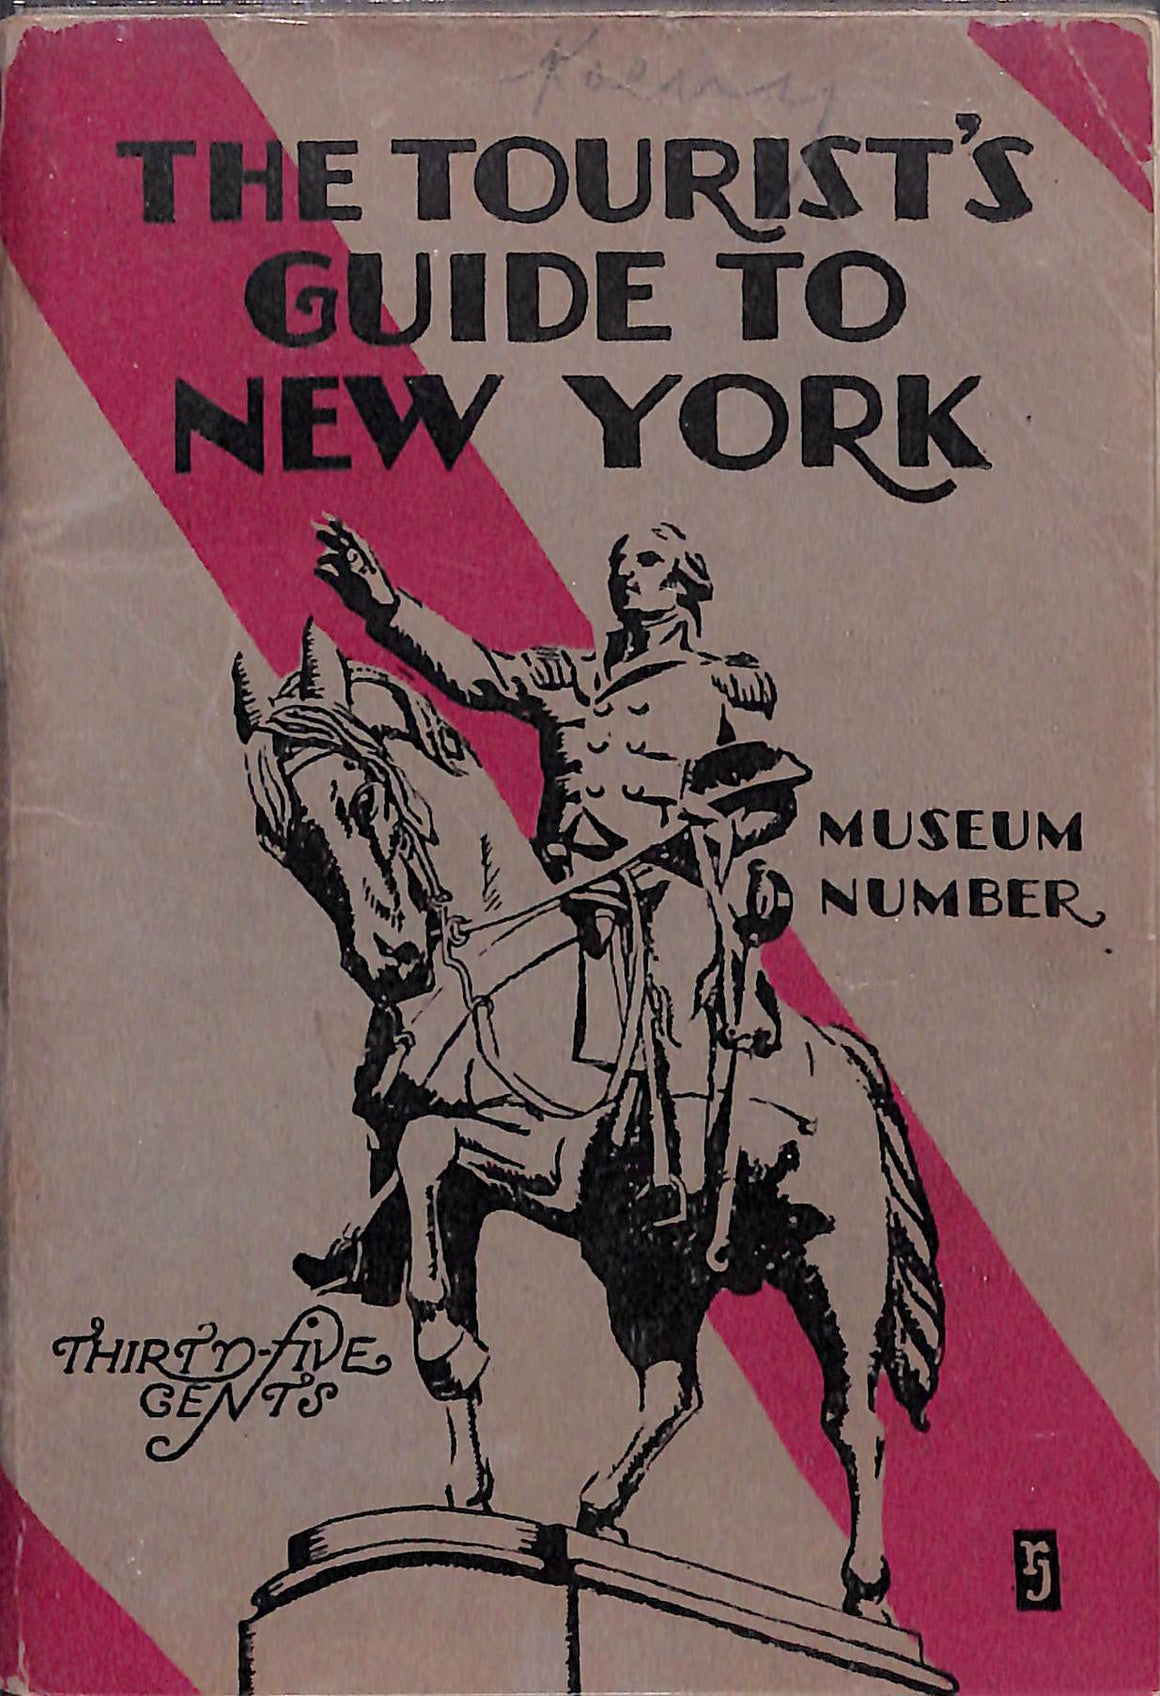 "The Tourist's Guide To New York" 1929